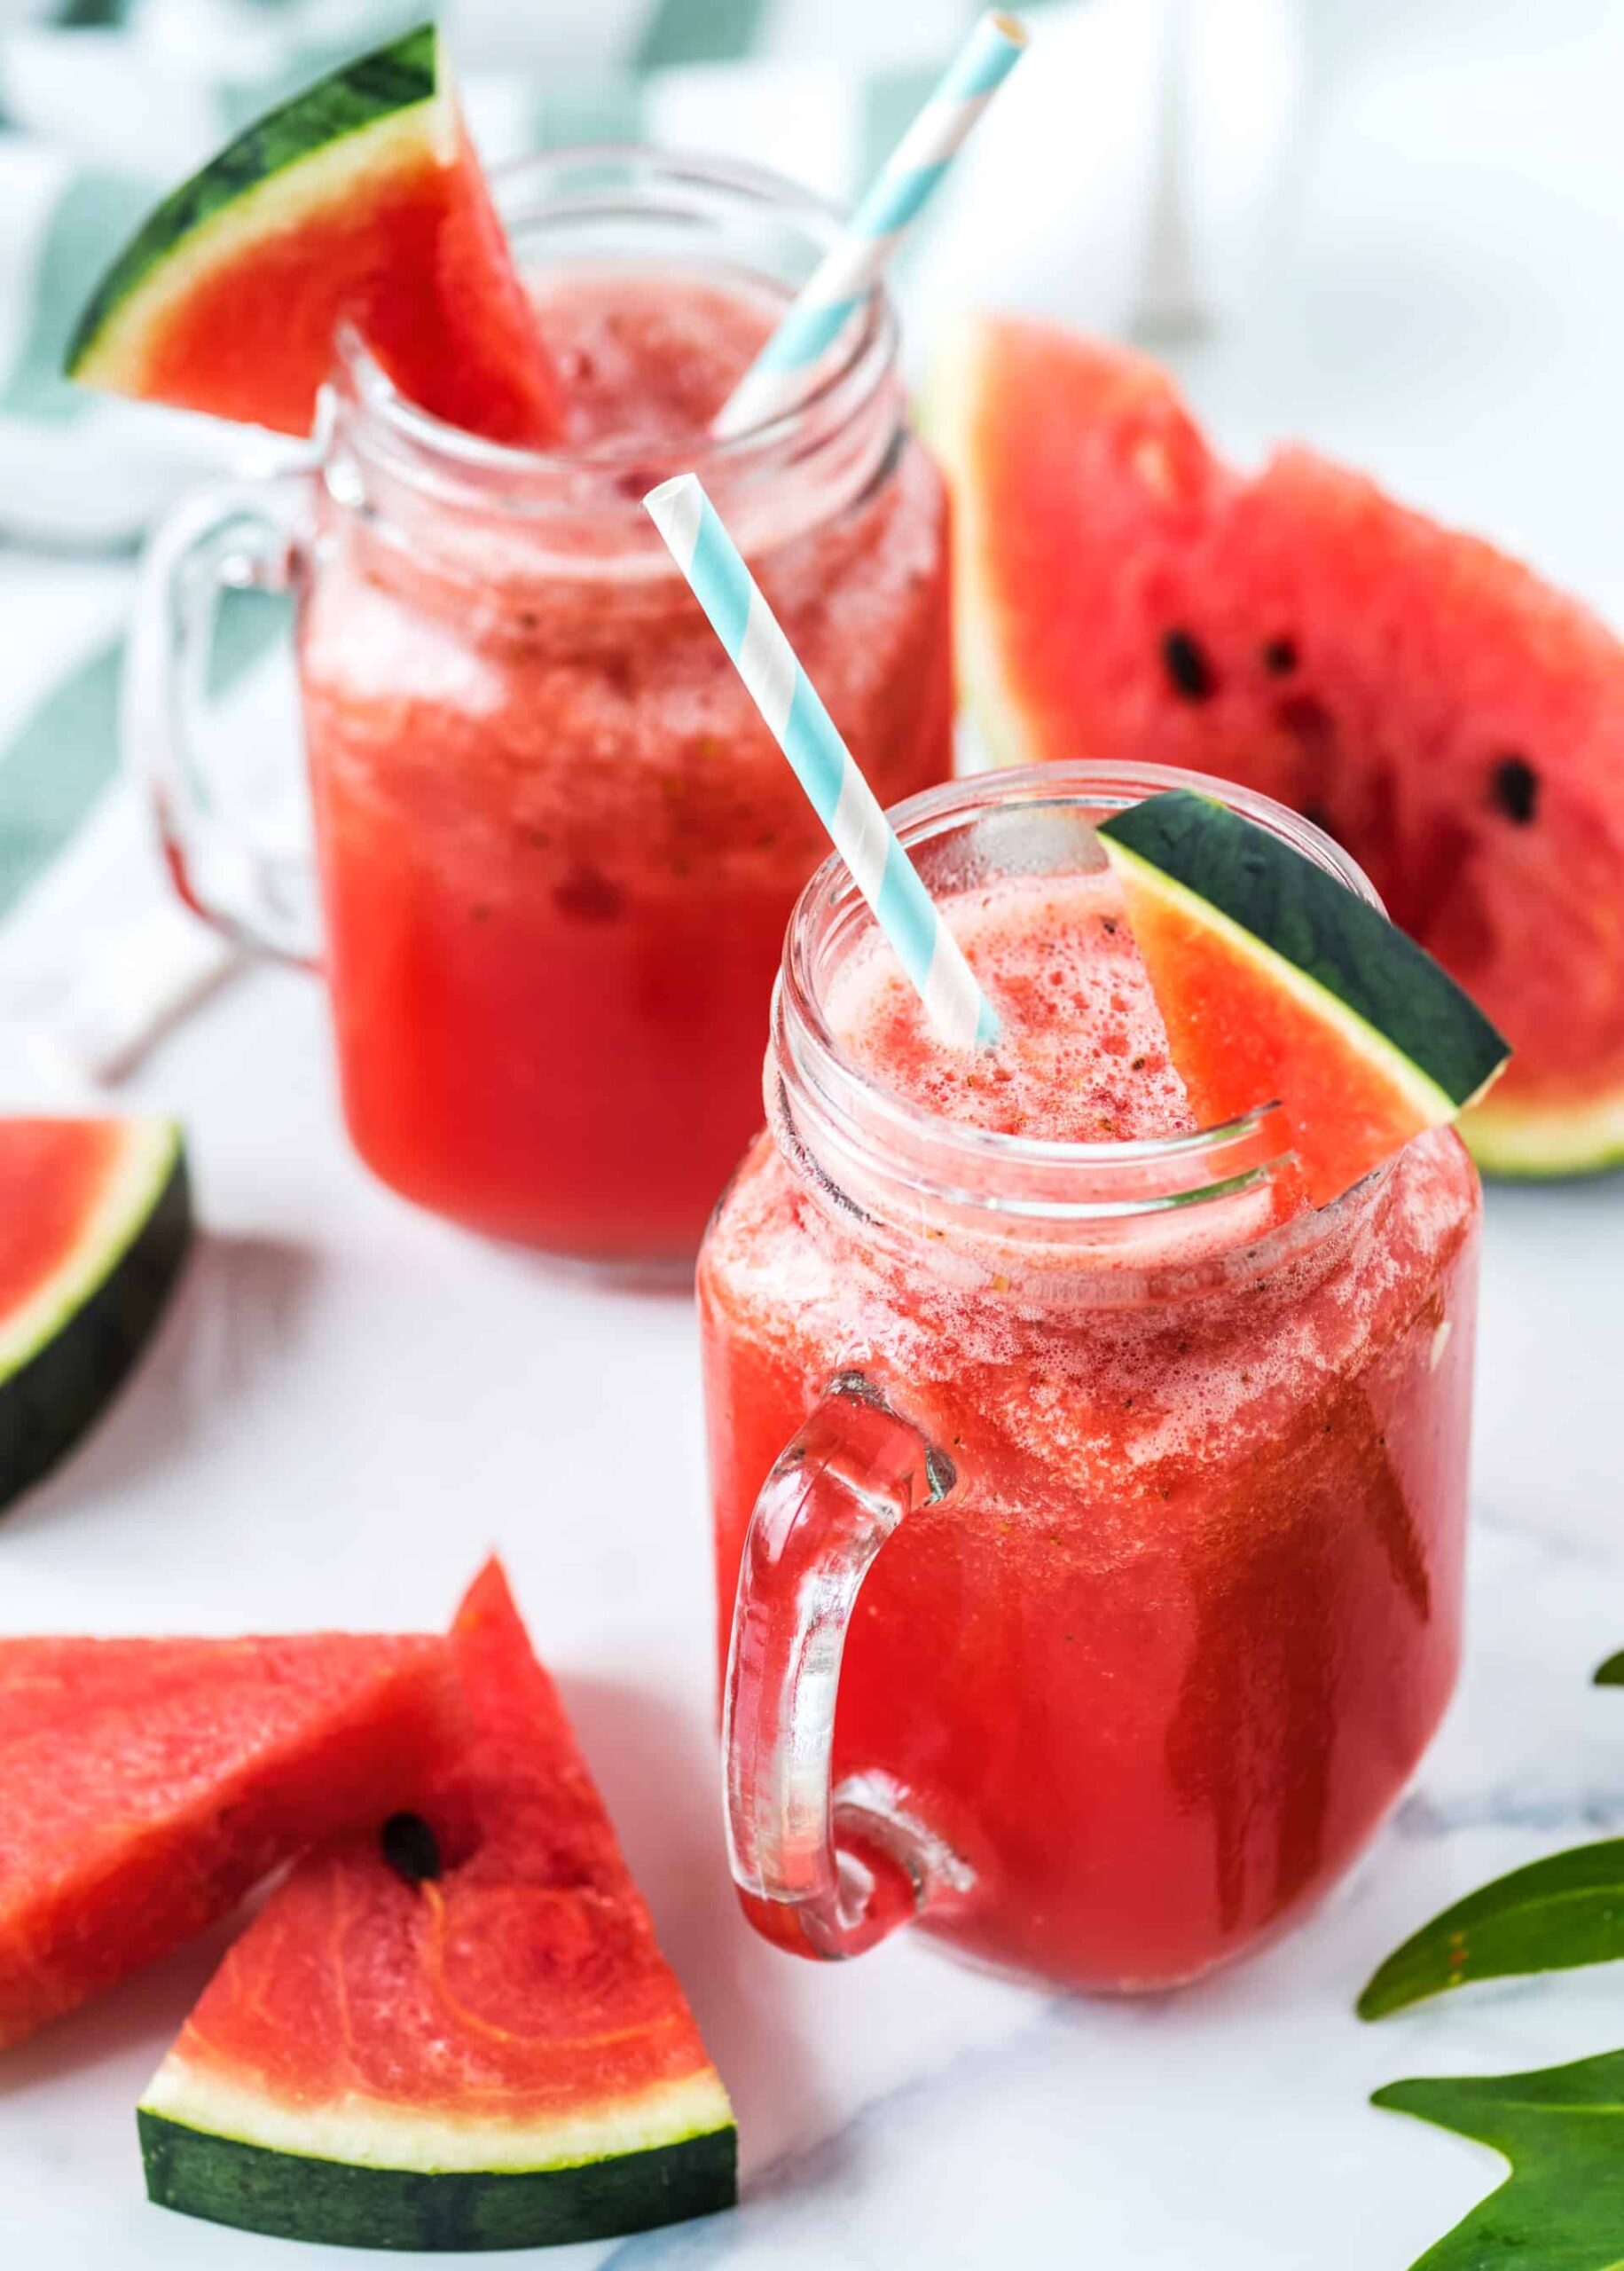 Feasible to Treat Erectile Dysfunction Using Watermelon